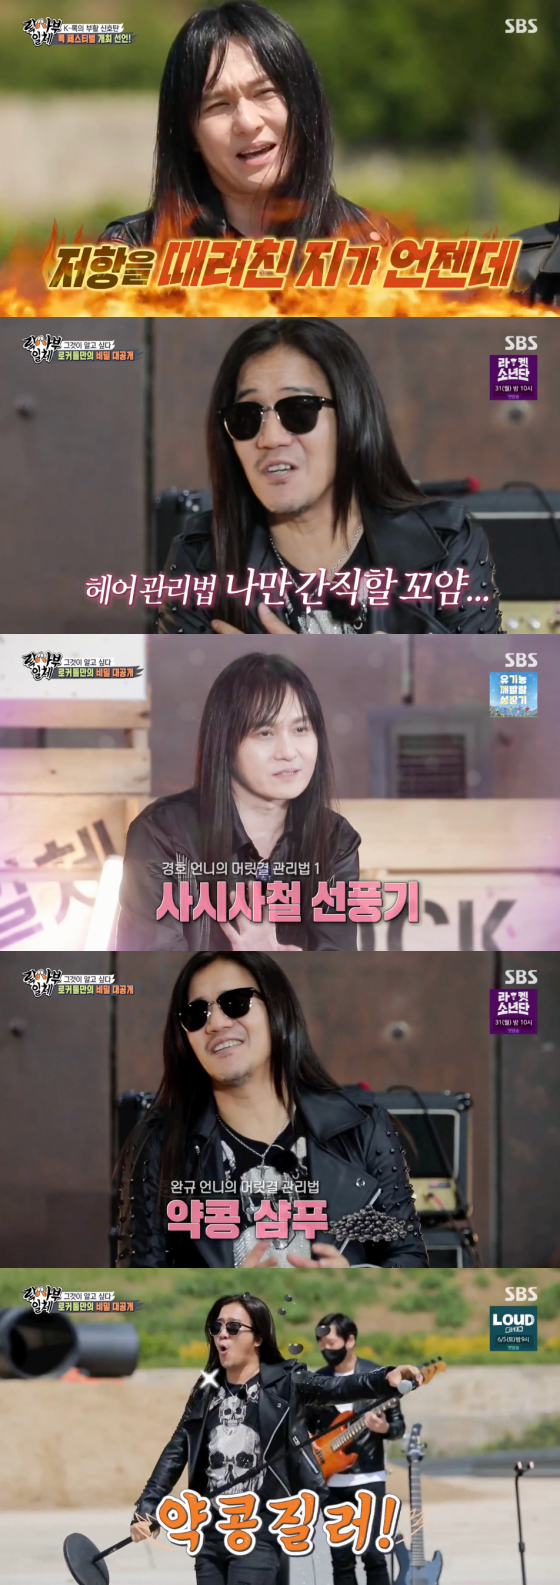 In the SBS entertainment program All The Butlers broadcasted on the 23rd, Risens Park Wan-kyu, Kim Tae-won and Kim Kyung-ho appeared in rock spirit initiation.Kim Kyung-ho went on the Rock Spirit Initiation, saying Rox Spirit is resistance, freedom and peace; Park Wan-kyu said: Theres one more.But nowadays, we are enjoying broadcasting through many compromises with society, Park Wan-kyu said, Thank you for calling me.Kim Kyung-ho later said, When did you beat resistance? When did you talk about resistance? Weve been compromised for a long time. Dont talk about underground.We have all been out of the sun for a long time, he added.The reason why the three people of Rock vs. appeared in All The Butlers was to enjoy the performances of the rock industry that have been without performances for a long time due to Corona.Kim Kyung-ho said: I want to make you our successor.I am going to show the demonstration, but I am going to show the expectation of the members. He said, I am going to invite the rock band juniors who are growing their dreams in a non-face-to-face way. All The Butlers members noted the rockers signature features: leather Full Metal Jacket, sunglasses and long hair, asking, How do you manage long hair?In response, Park Wan-kyu said in a firm tone: Rockers dont share hair care laws - its our survival strategy.I still have a lot of hair left, Kim Kyung-ho said, but I am only three.Kim Kyung-ho said, I want to dry with a sashimi-iron fan, cold wind. And hair loss shampoo. How much content is it, reading in the late days.And now I dye at home. Park Wan-kyu said, There is a bean shampoo.But I have to write this well, and the Rockers are in a hurry. I just spray it, but I have to put it on and leave it for 6 to 7 minutes.Yang Se-hyeong said, Somehow I smelled sour, I thought it was clear.Kim Kyung-ho told them, I do not know what comfort to give, but I believe that you will not quit no matter how you dry it around.I sincerely hope that someday I will perform together on stage and fulfill my dream. Kim Tae-won said, Musicers need to be loved to get energy.Please, Risen, and conveyed comfort and encouragement.The performance opened with SHOUT by Park Wan-kyu, Kim Kyung-ho and Kim Tae-won.Jung Eun-woo said, Ive never seen a rock performance before, and Yang Se-hyeong said, Rock performances should come and see themselves.Kim Tae-wons song 4.1.9 Elephant Escapes followed by juniors, Did not I start guitar with him?, It is creepy.I was crazy, and Jung Eun-woo and Kim Dong-Hyun filled the stage with Never Ending Story with Park Wan-kyu.I can stand up and revive once again, said Jung Eun-woo.Yang Se-hyeong transformed into Breweries and presented Its My Life with Park Wan-kyu.Yang Se-hyeong made a perfect rocker with a full metal jacket, a long hair wig, and a base with fireworks.Yang Se-hyeong showed off his rock spirit by shouting, Will you sit at home? Park Wan-kyu was surprised that Mr.Kim Tae-won admired the unexpected skills of Jung Eun-woo, Kim Dong-Hyun, and Yang Se-hyeong and added a laugh to the extension Good.The All The Butlers member, who will decorate the long-awaited final stage, was by far Lee Seung-gi.Lee Seung-gi said, I listened to my senior song and played a high school band and became a singer.It is an honor, said Kim Kyung-ho and the breath of fantasy, I loved you showed the eye.Then, when Park Wan-kyu joined, the three were impressed by the enthusiasm for Millennial Love and Forbidden Love.